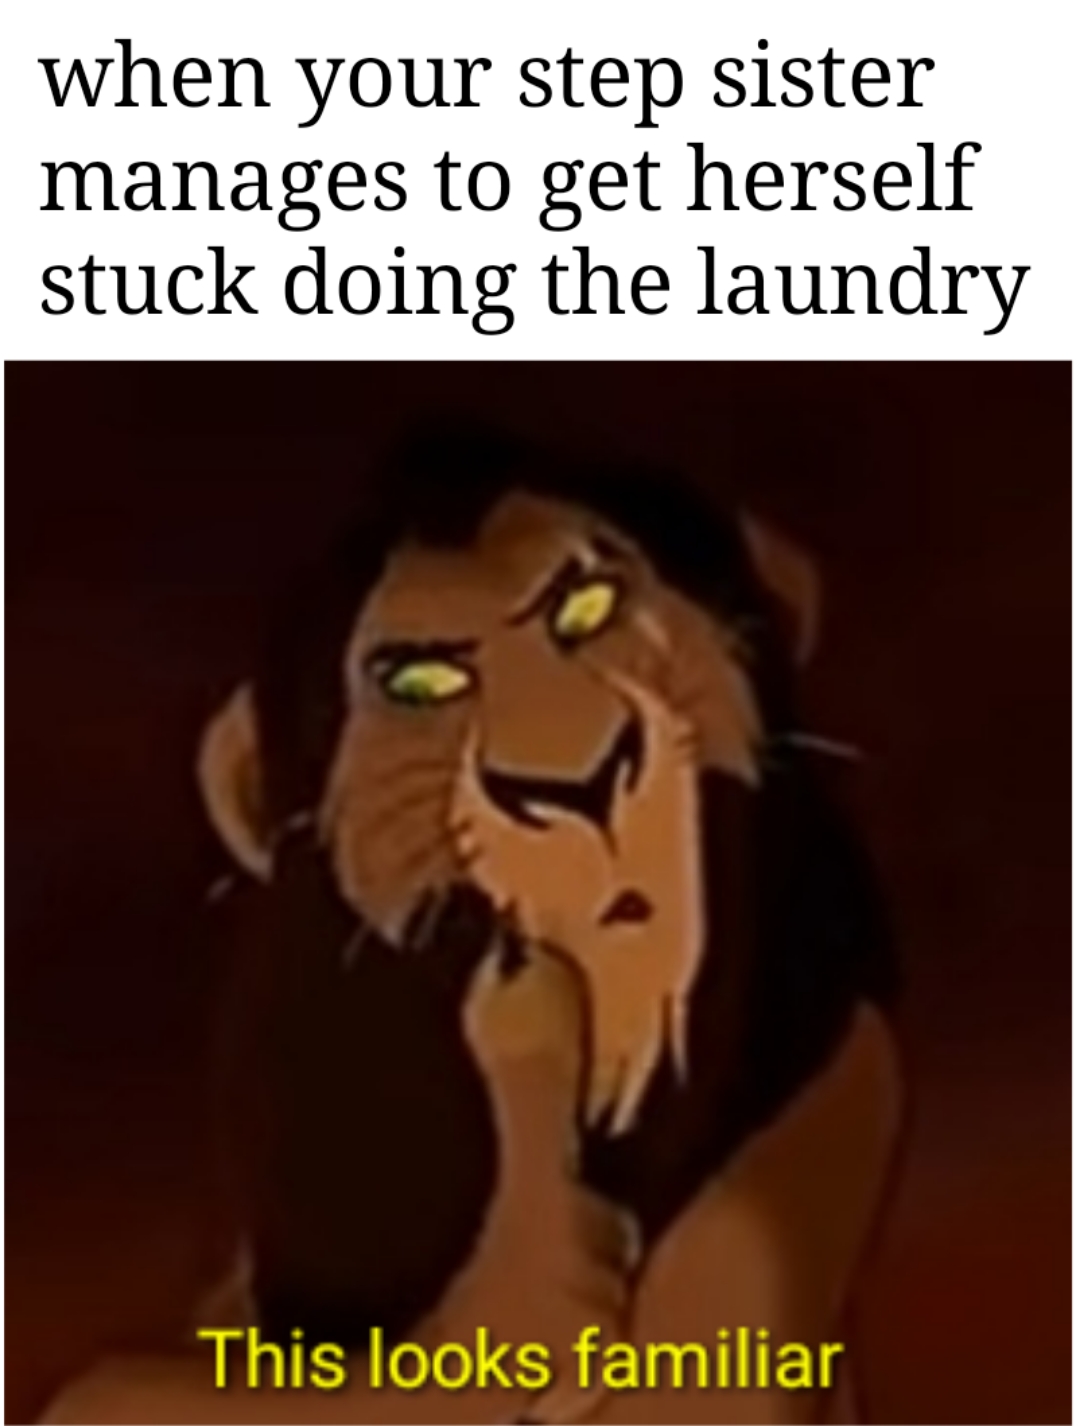 dank memes reddit - looks familiar meme - when your step sister manages to get herself stuck doing the laundry This looks familiar